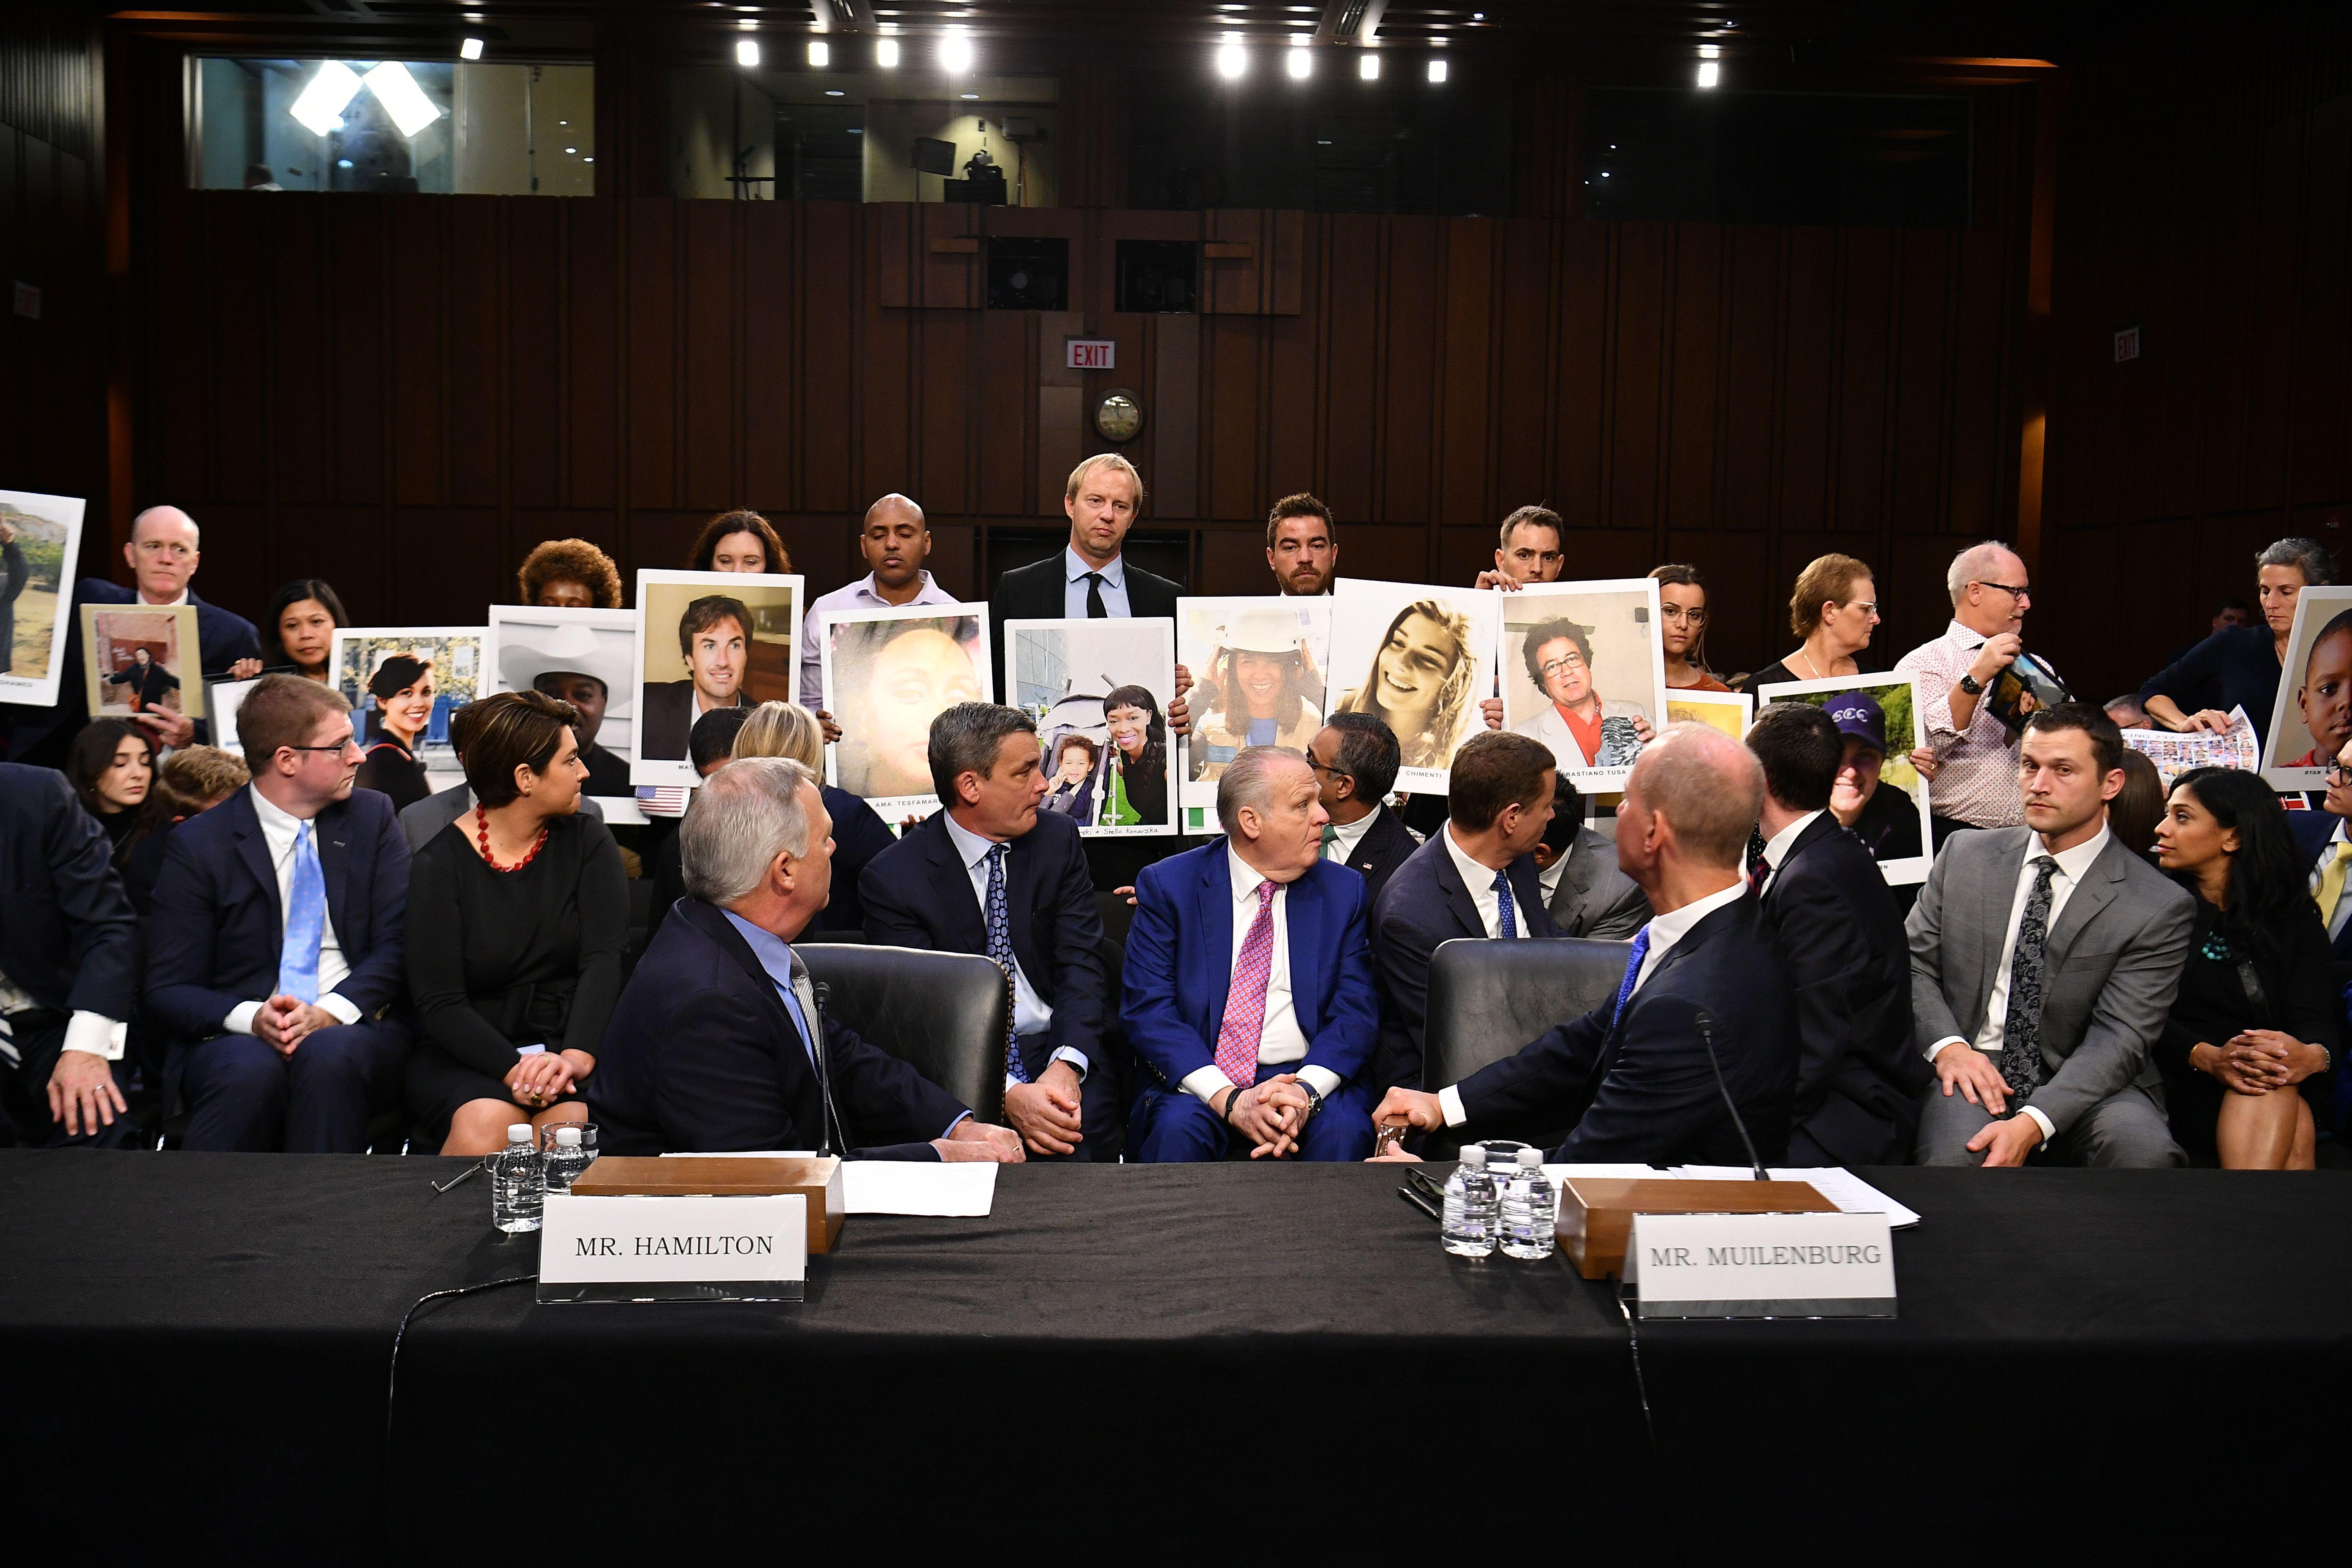 Boeing executives and other attendees of the committee hearing turn to face family members who hold up photos of Boeing 737 Max crash victims